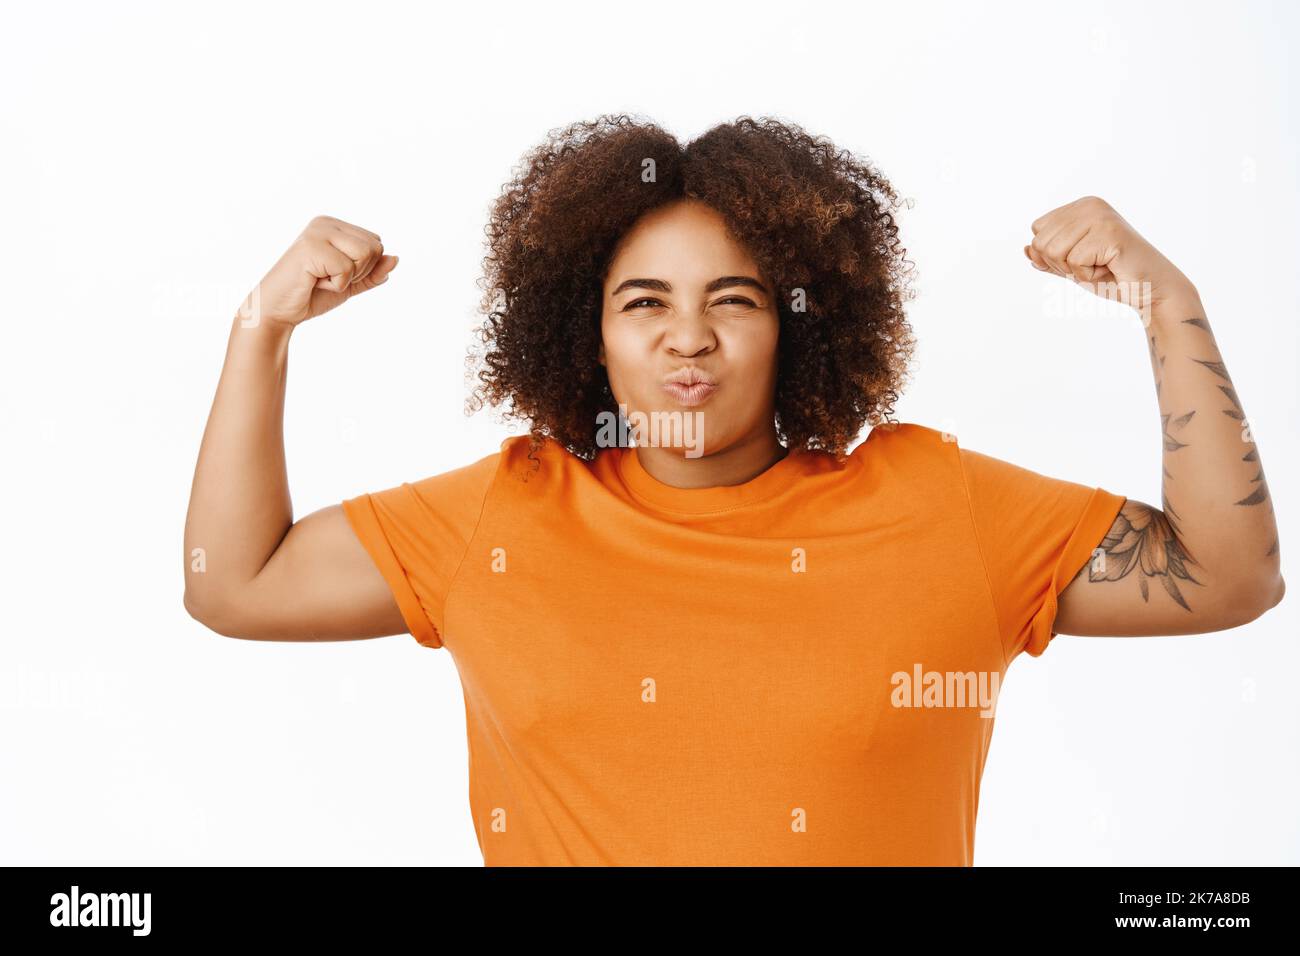 Portrait of confident and sassy african american woman, flexing biceps, raising arms and showing her strong muscles, feeling empowered, shouting Stock Photo